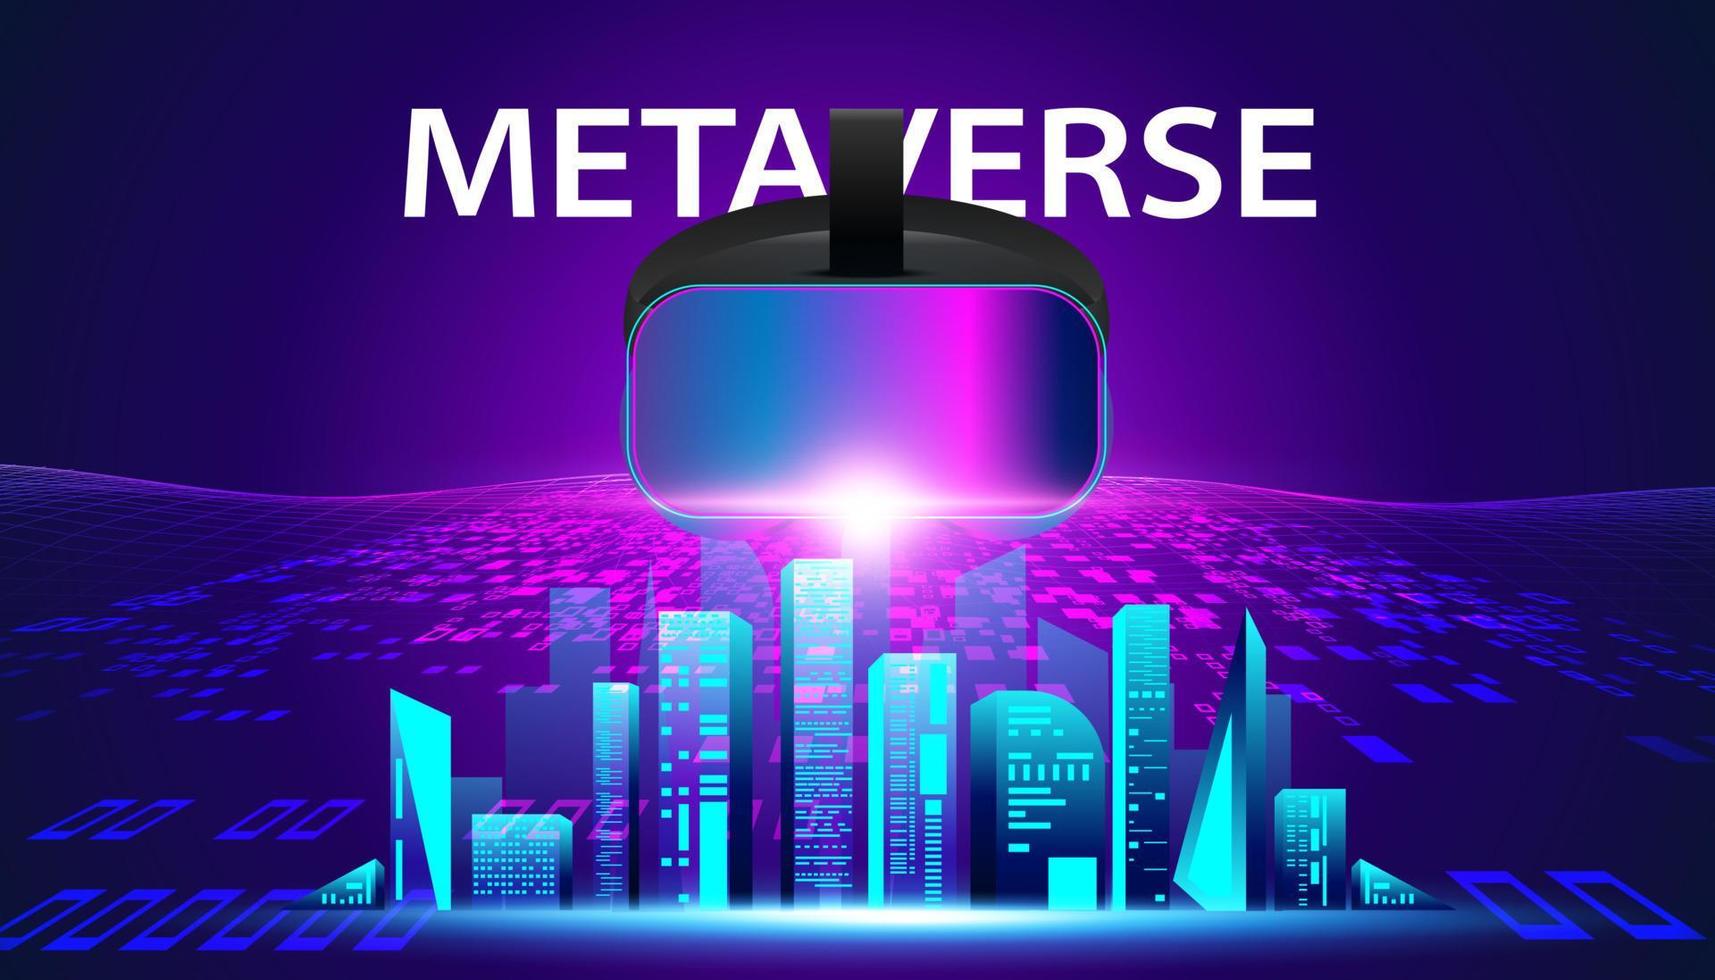 Abstract Metaverse VR glasses Virtual reality headset Concept colorful of Future digital technology metaverse connected to the virtual space on a modern background. vector